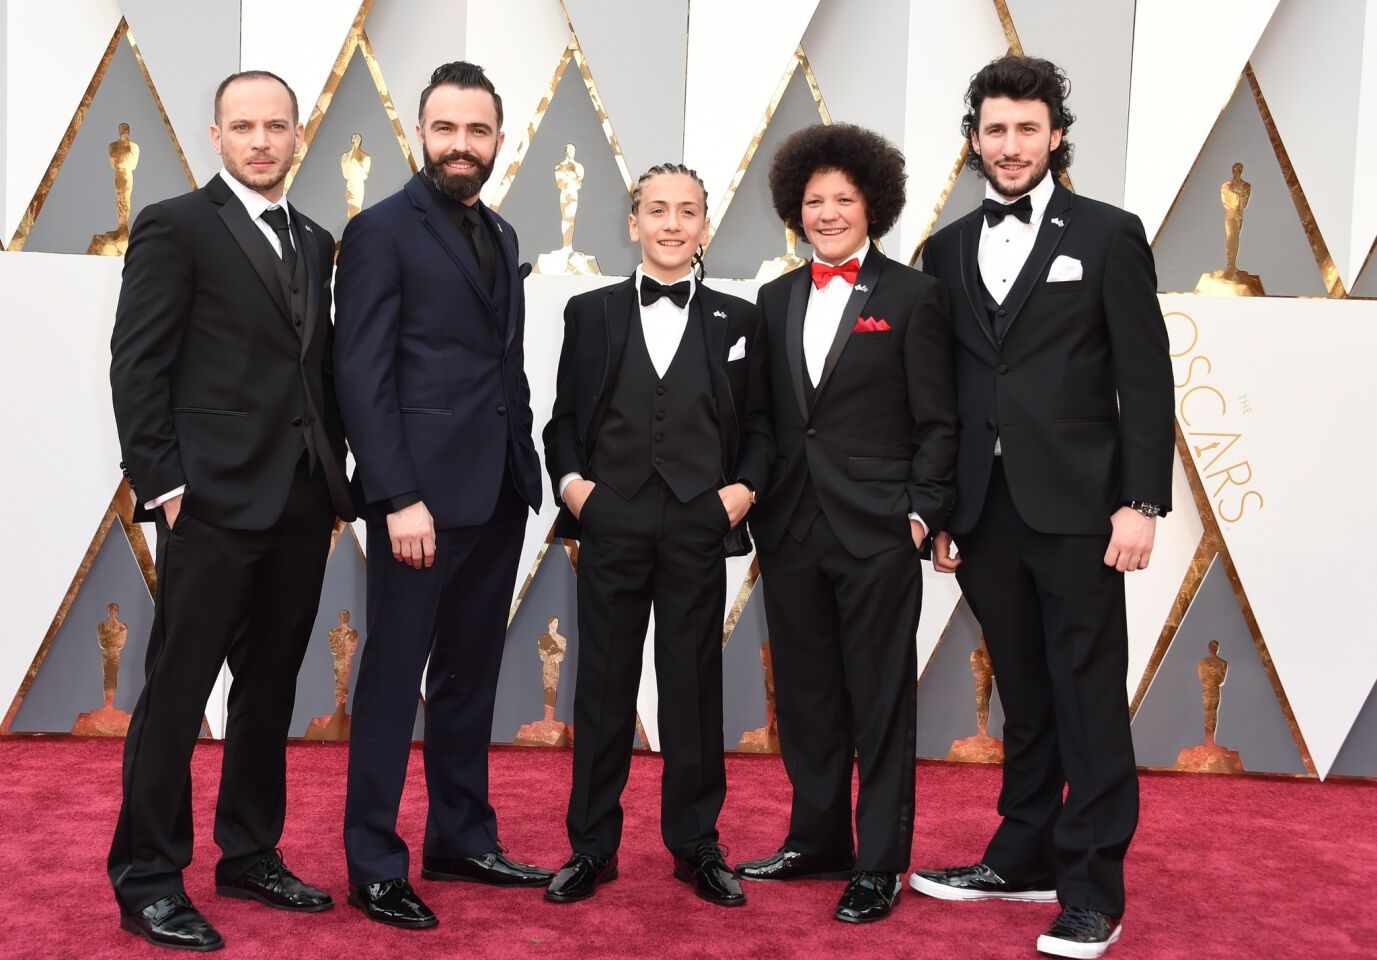 Members of the nominated live-action short feature "Shok" arrive on the red carpet for the 88th Academy Awards.